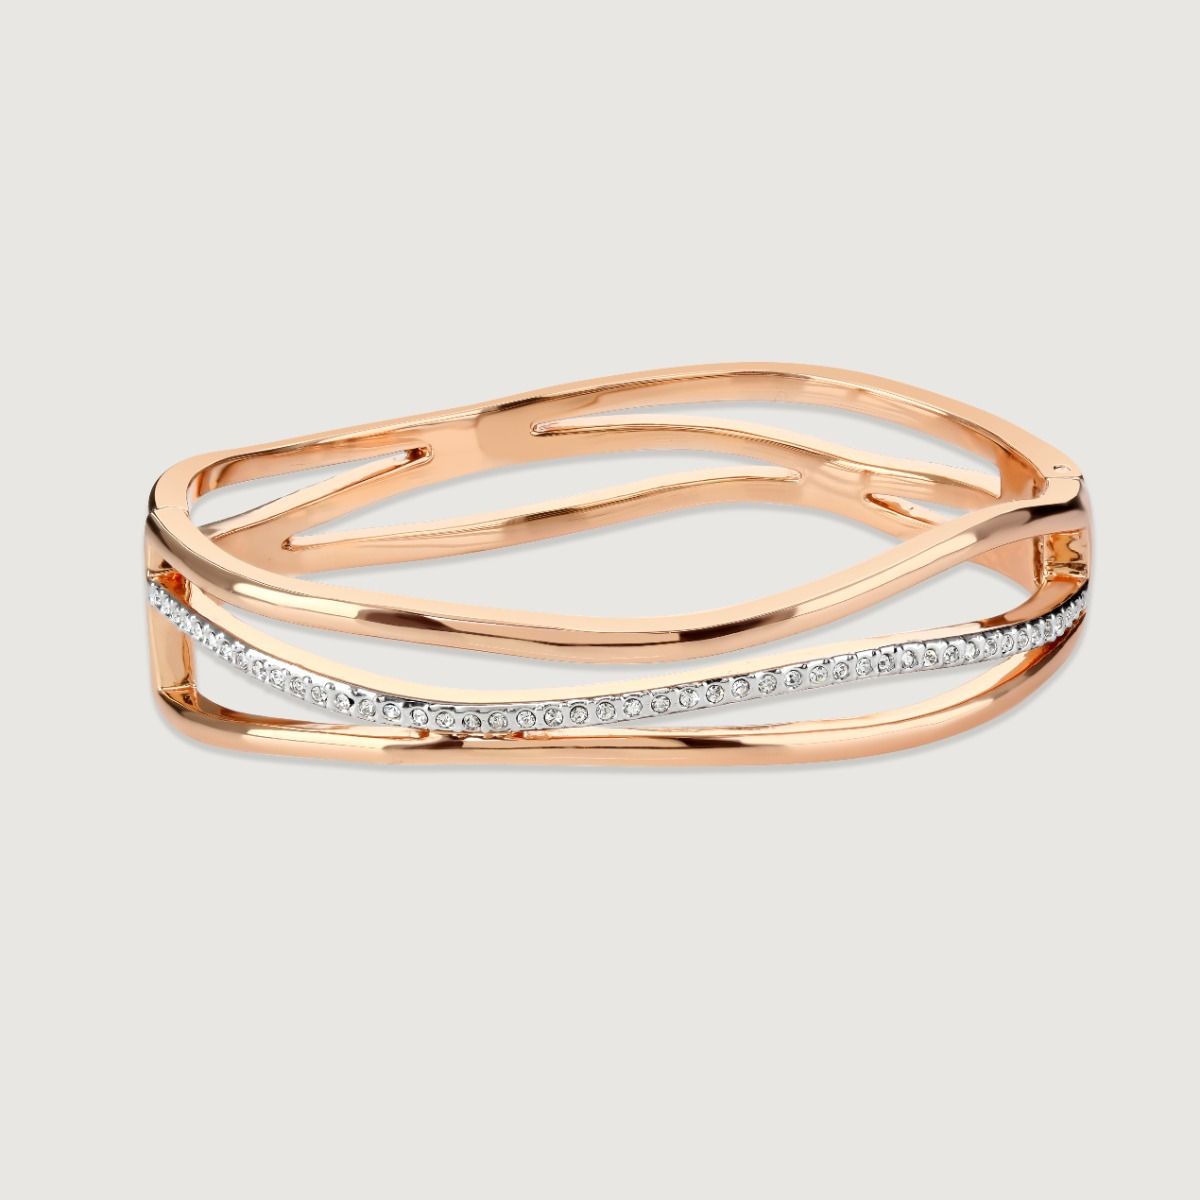 Flowing waves of warm rose gold plating enhanced by a shimmering central wave of white crystals make this clasp-opening Bayswater bangle contemporary and luxurious. This collection has a beautiful fluid quality that is sure to make a true style statement 